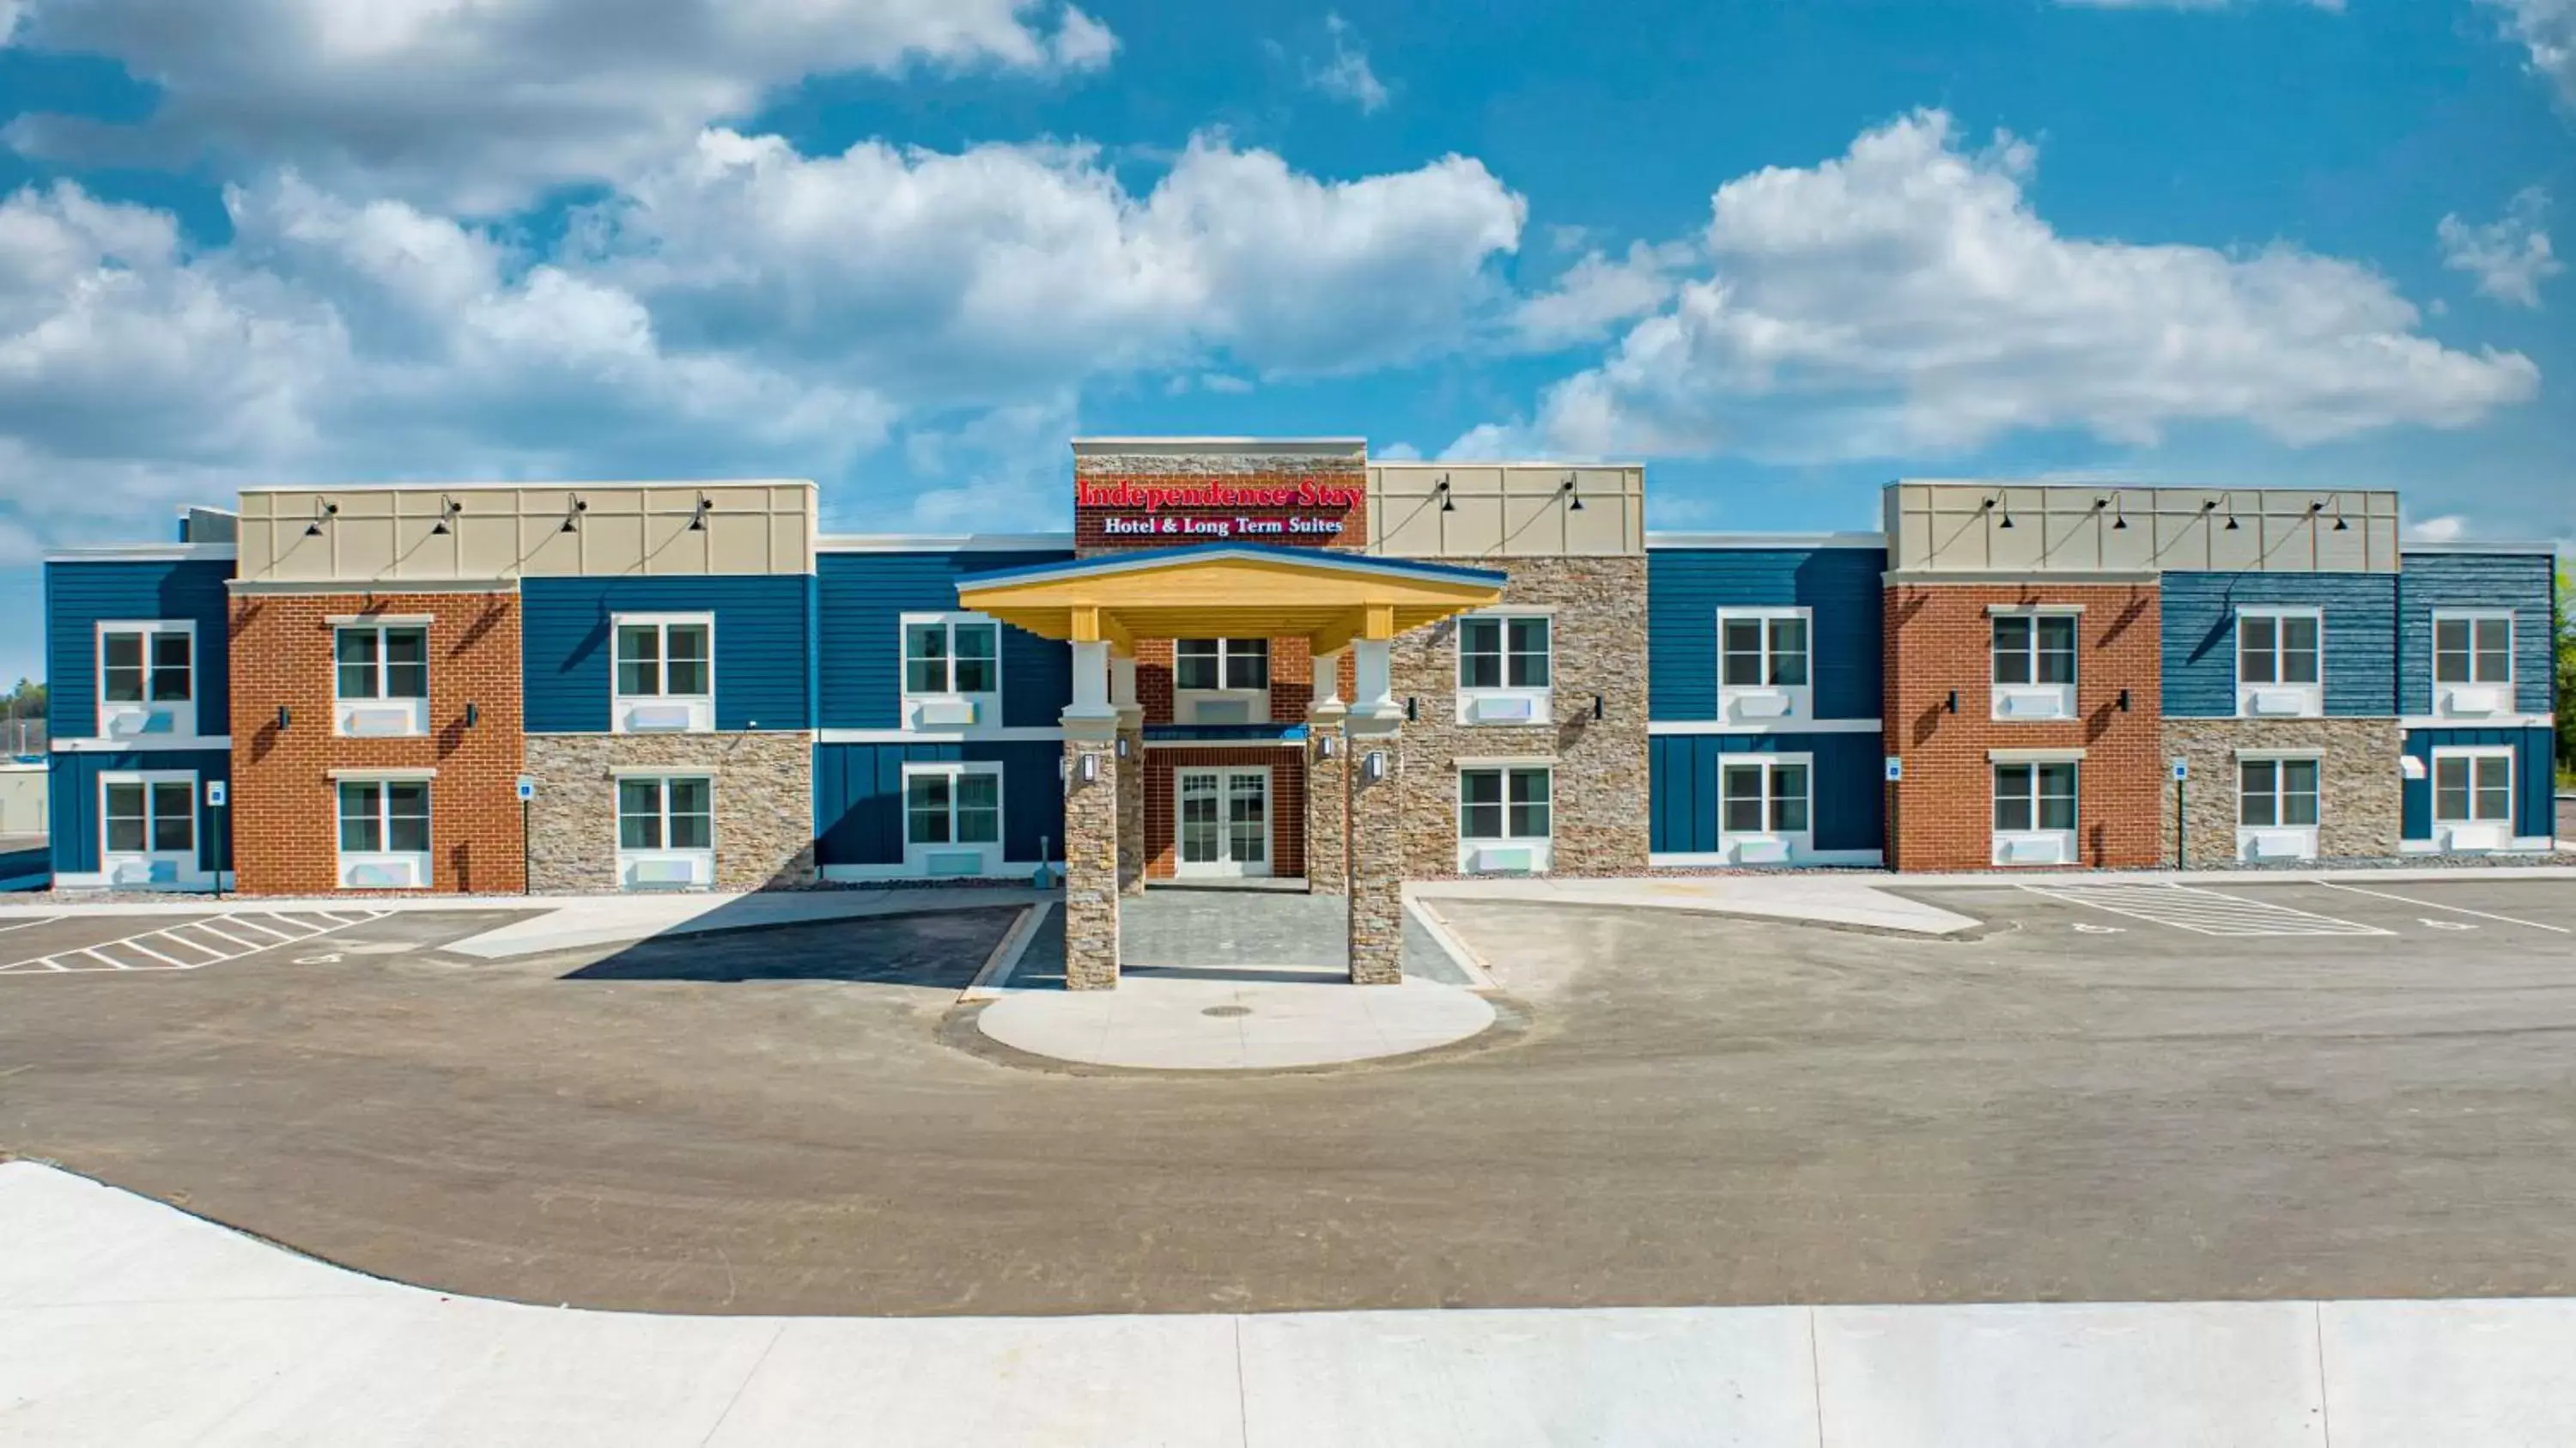 Property Building in Independence Stay Hotel and Long term suites